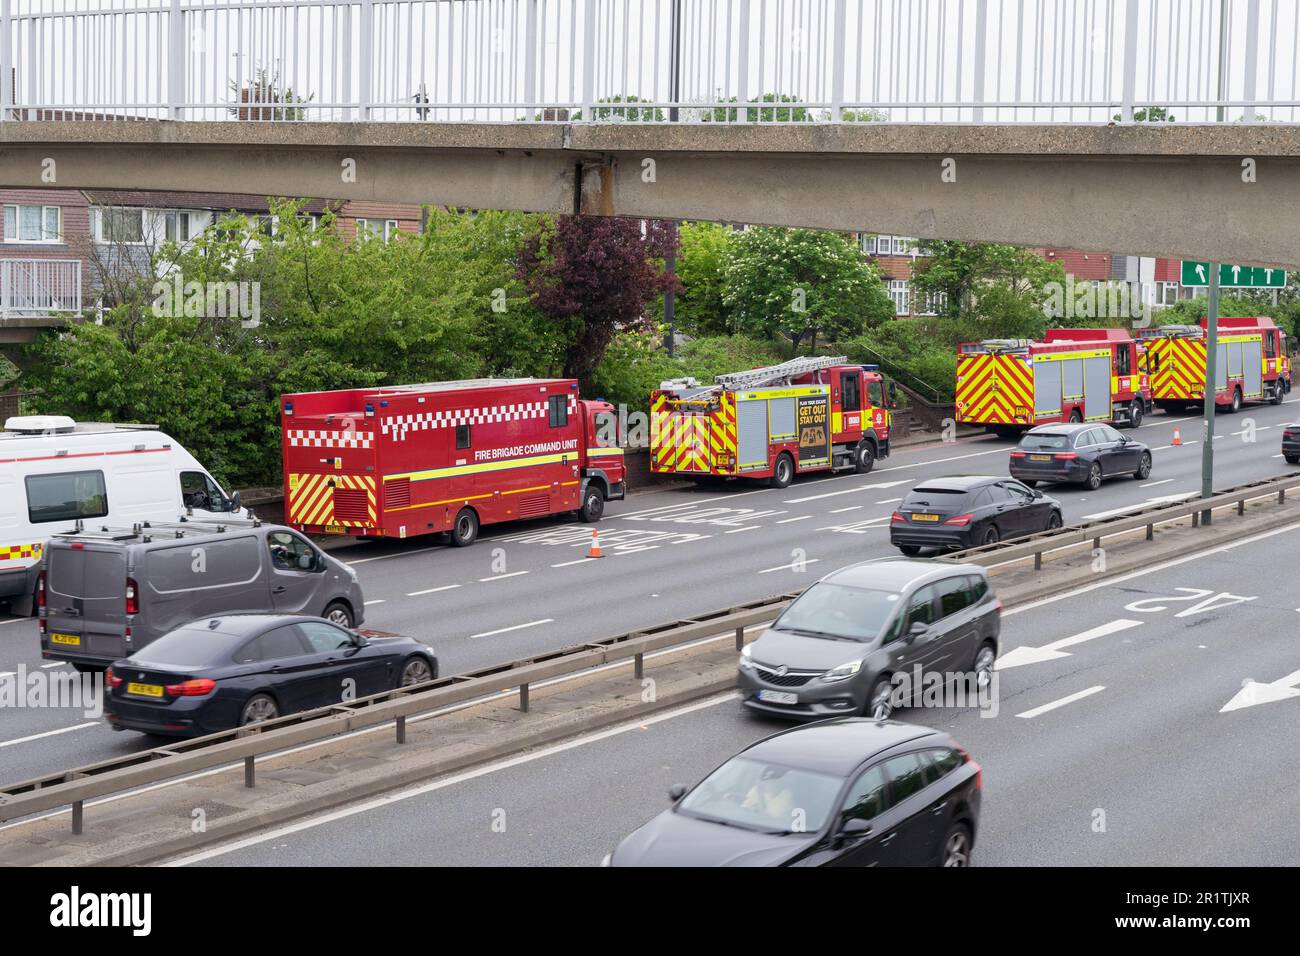 Bexley London UK, 13th May 2023. Multilple Fire Engines and ambulances  attended a major incident at a property on East Rochester Way, Westbound.  Credit: Xiu Bao/Alamy Live News Stock Photo - Alamy